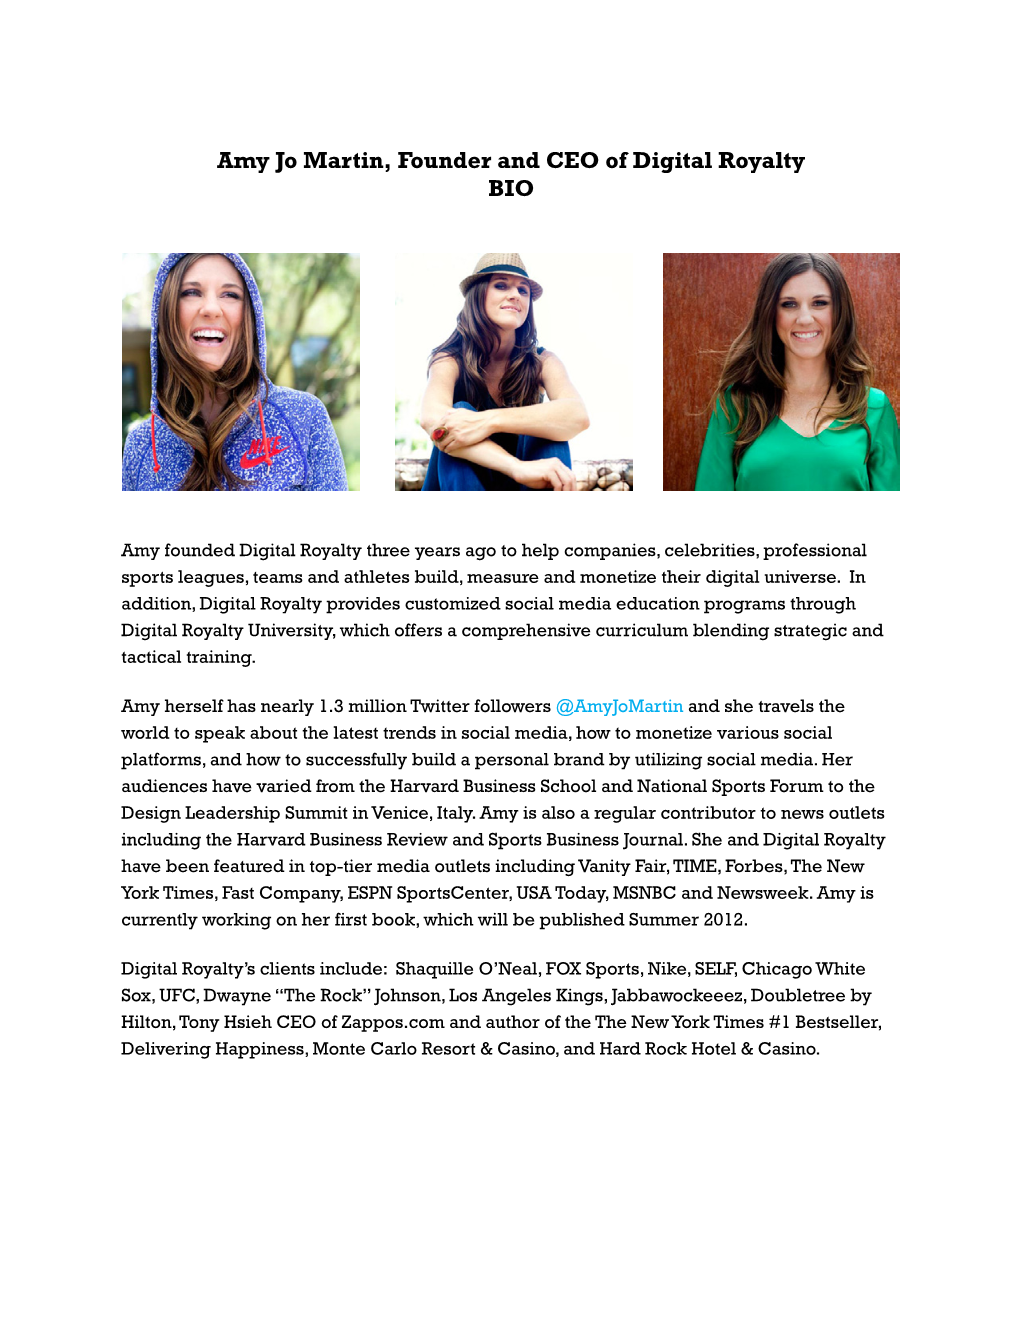 Amy Jo Martin, Founder and CEO of Digital Royalty BIO